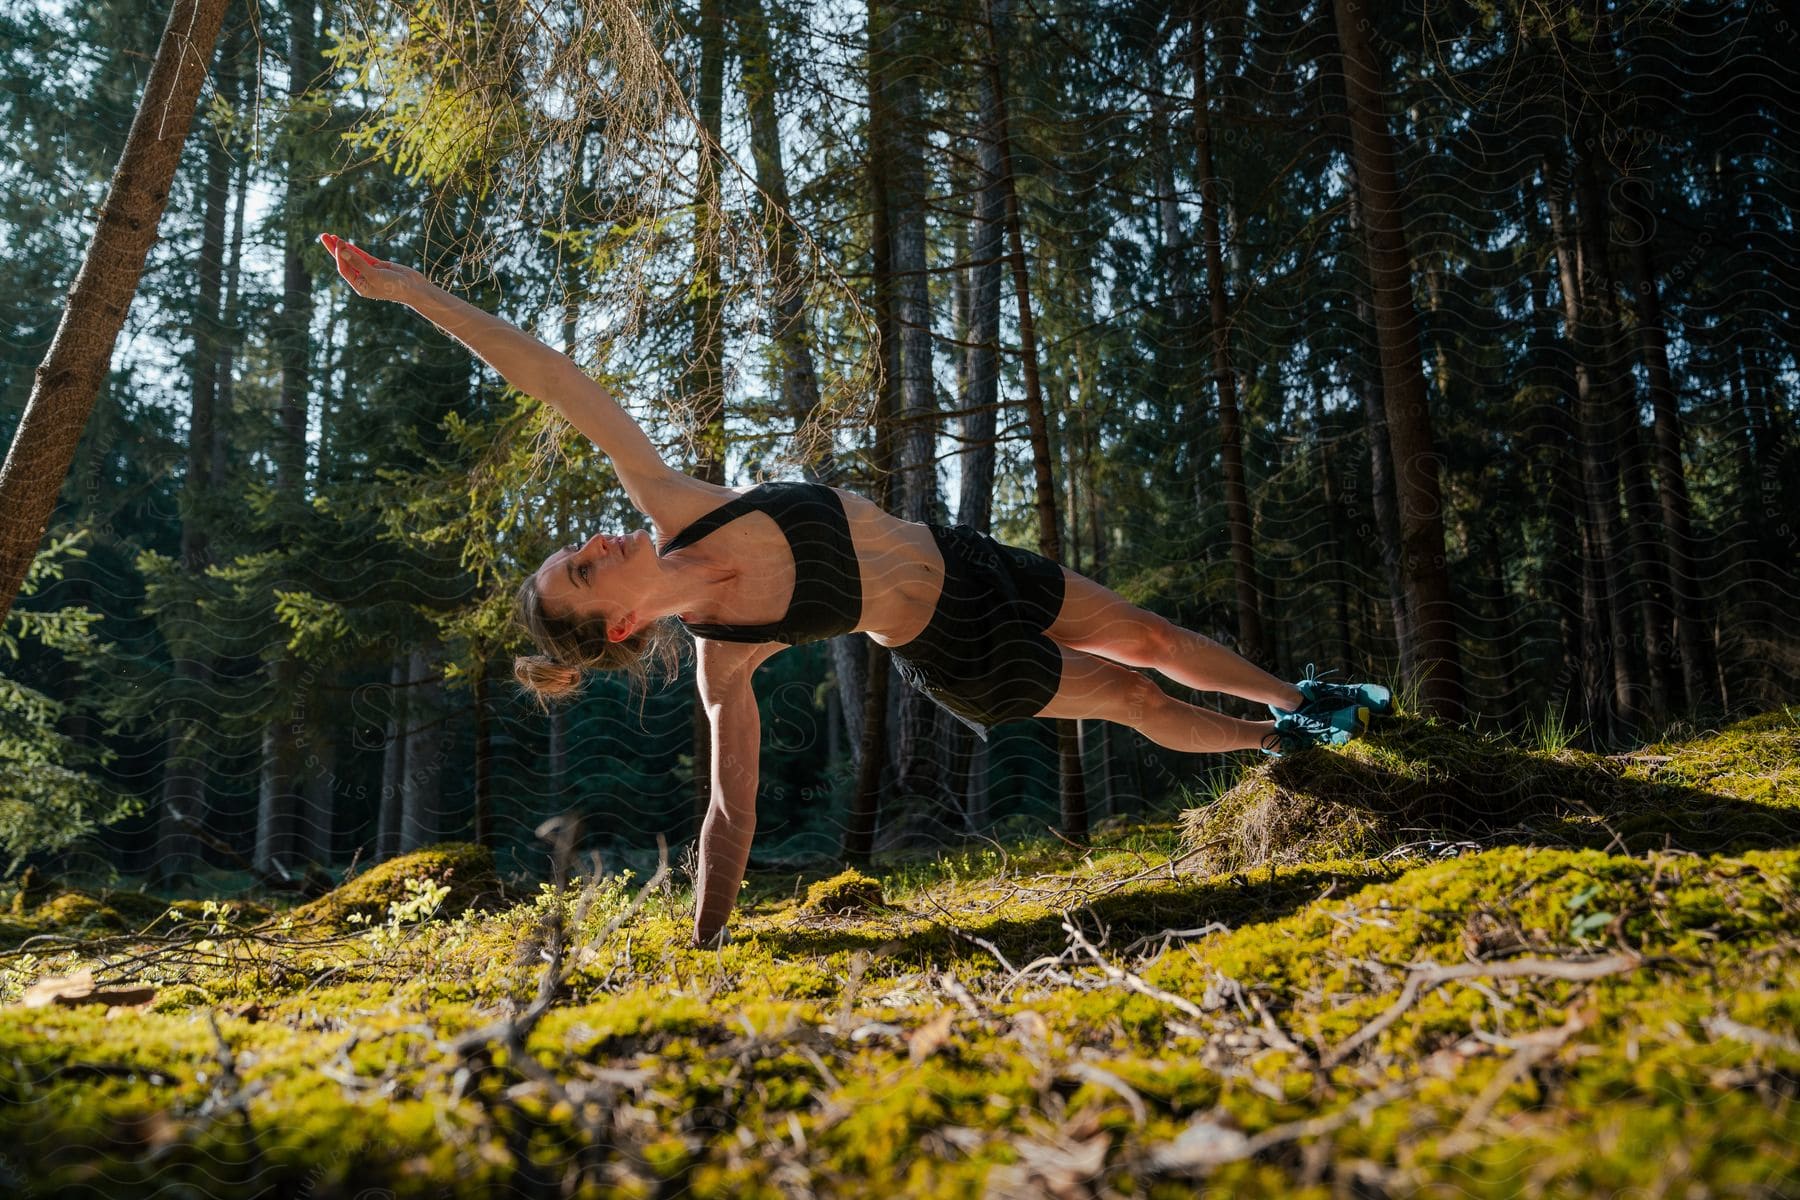 Woman wearing a black top and shorts stretches in the forest